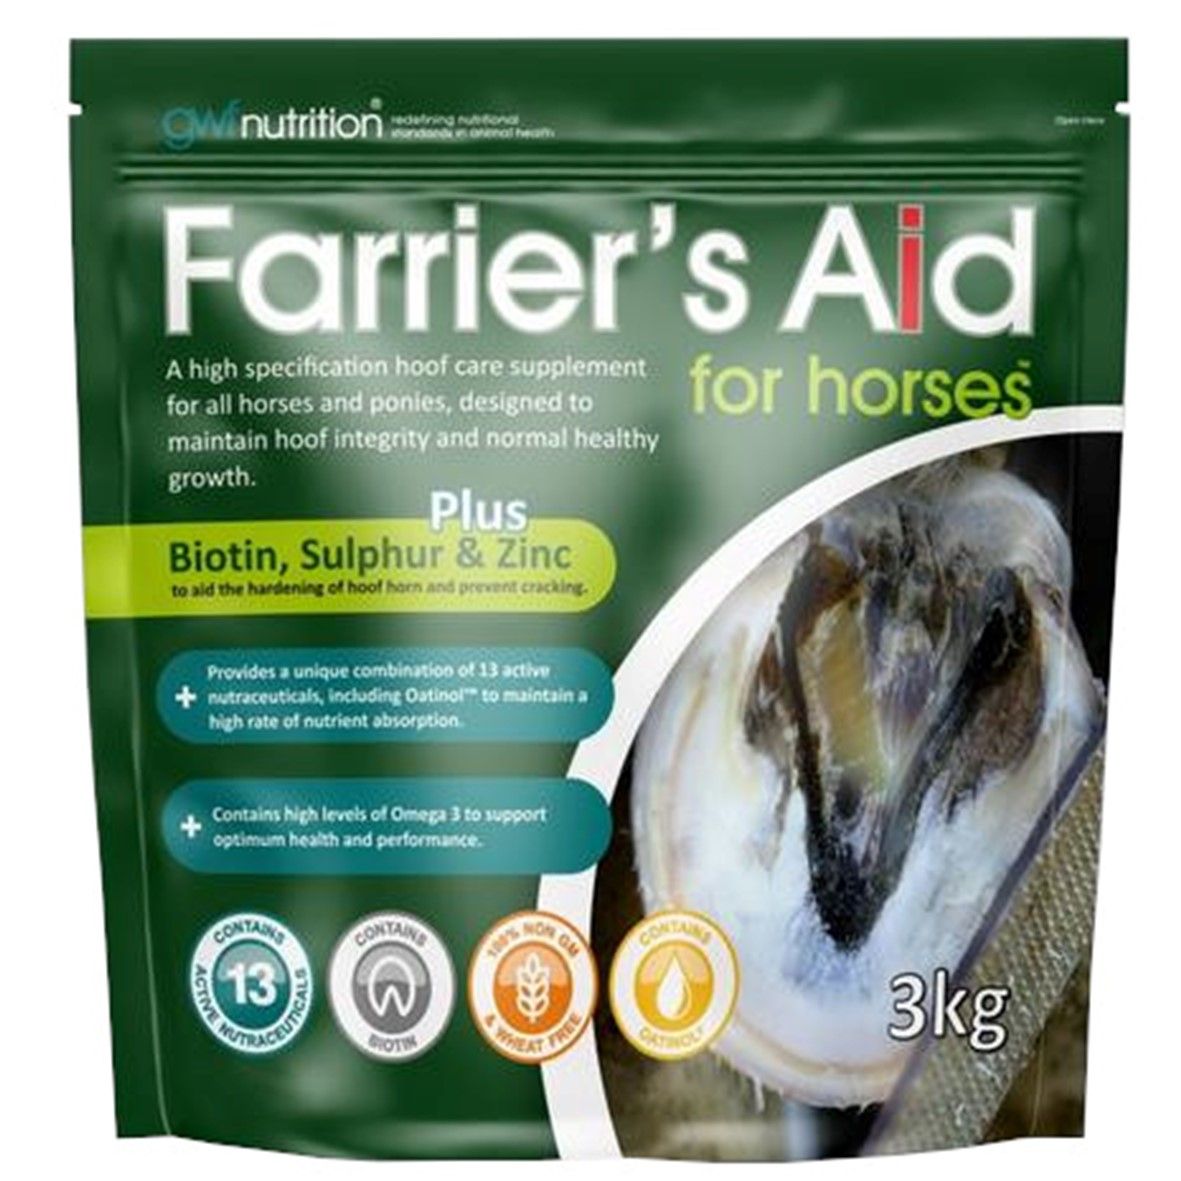 gwf-farriers-aid-for-horses-3kg-equine-.jpg